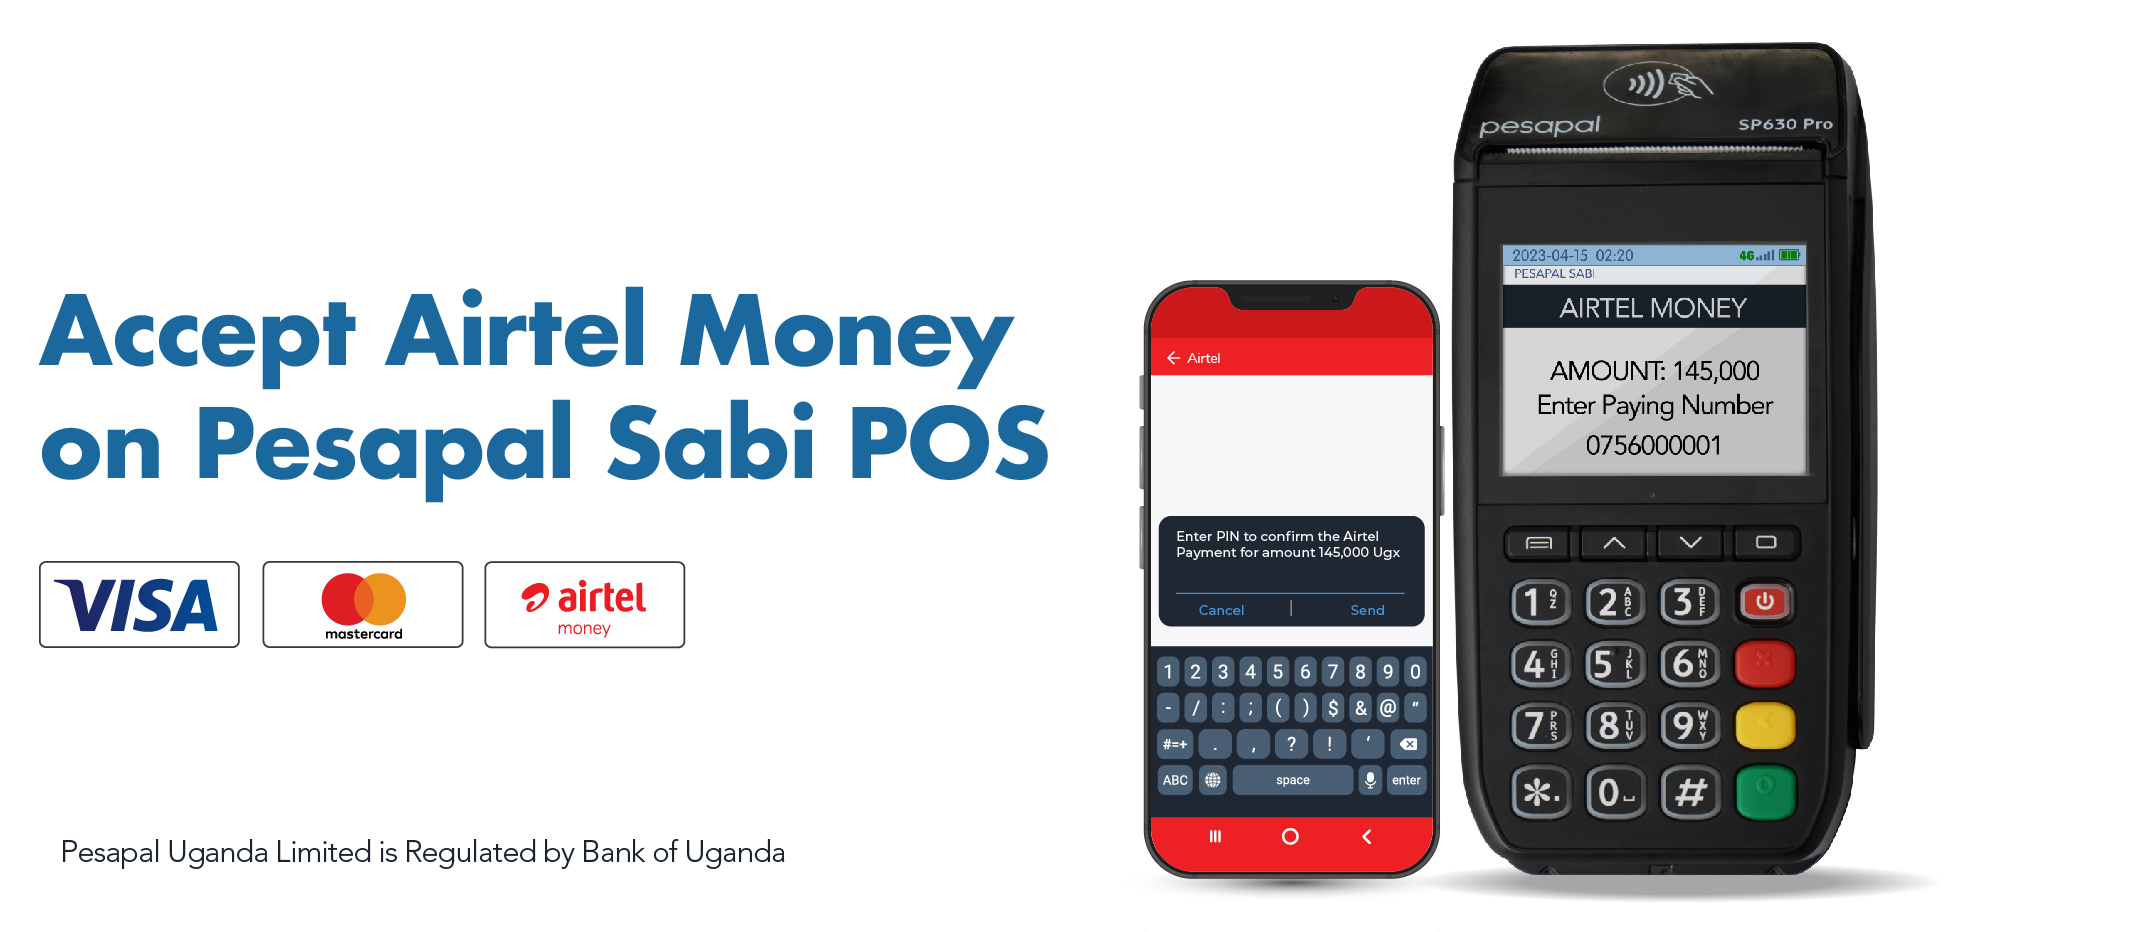 Airtel Mobile Commerce Uganda Limited, Pesapal Partner to Offer More Payment Options.